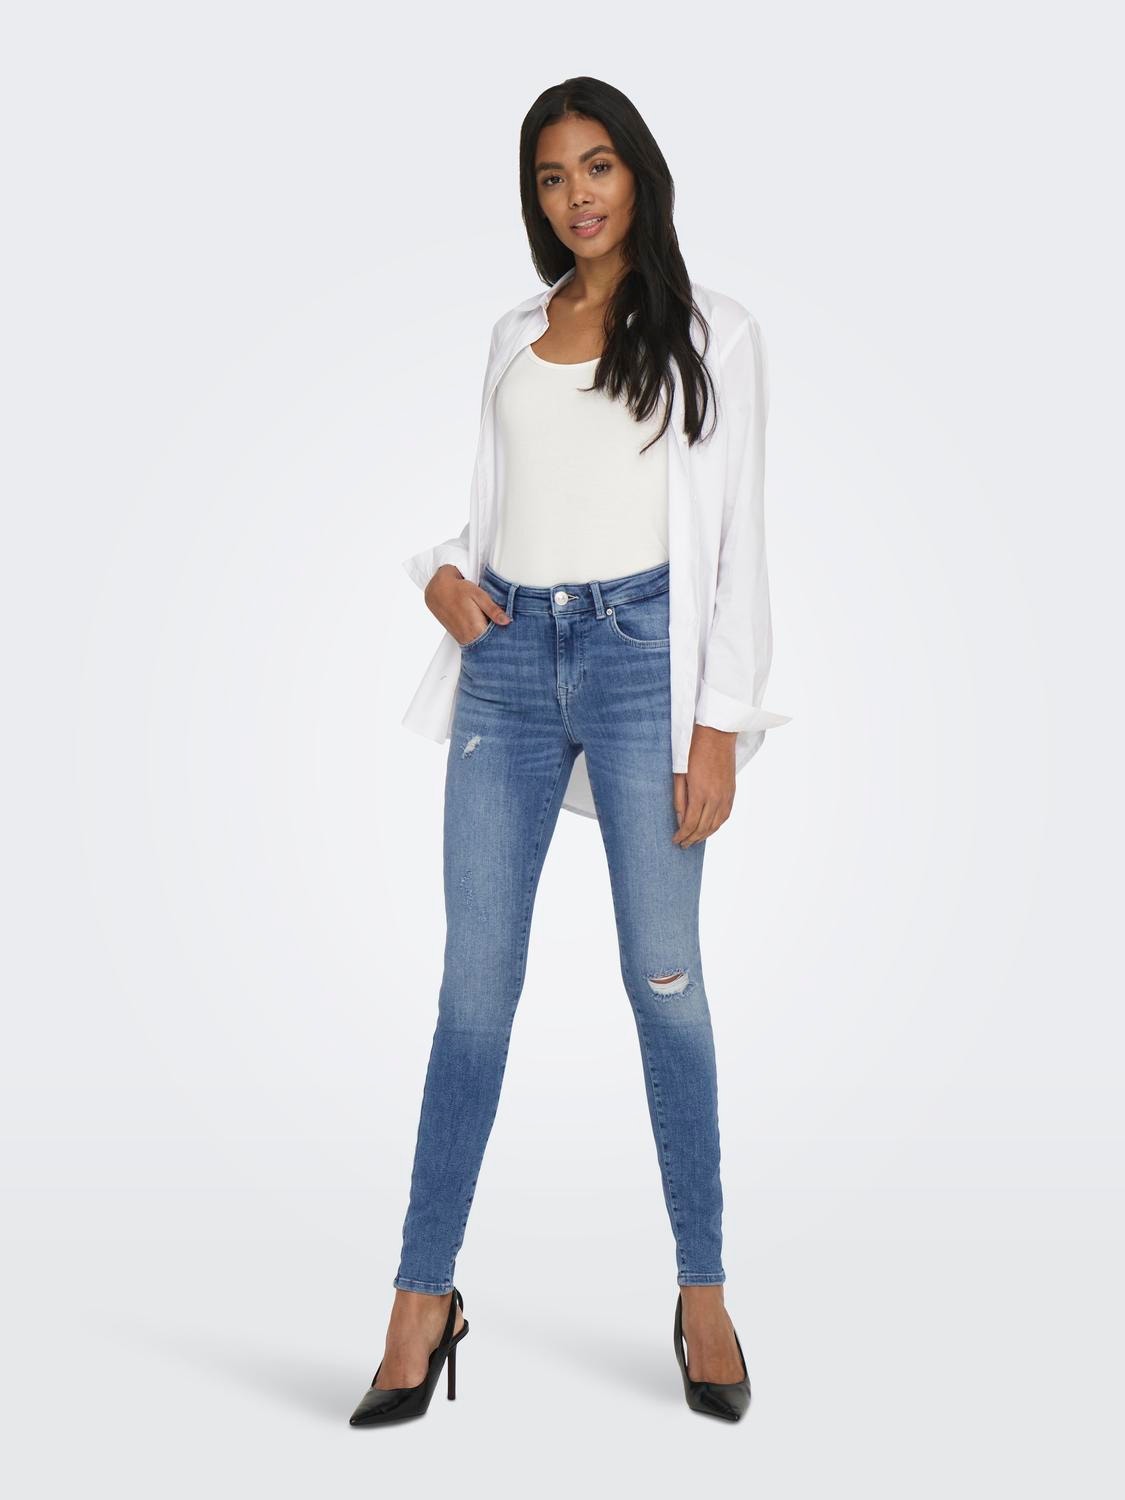 ONLY Jeans Skinny Fit Taille moyenne -Medium Blue Denim - 15230607